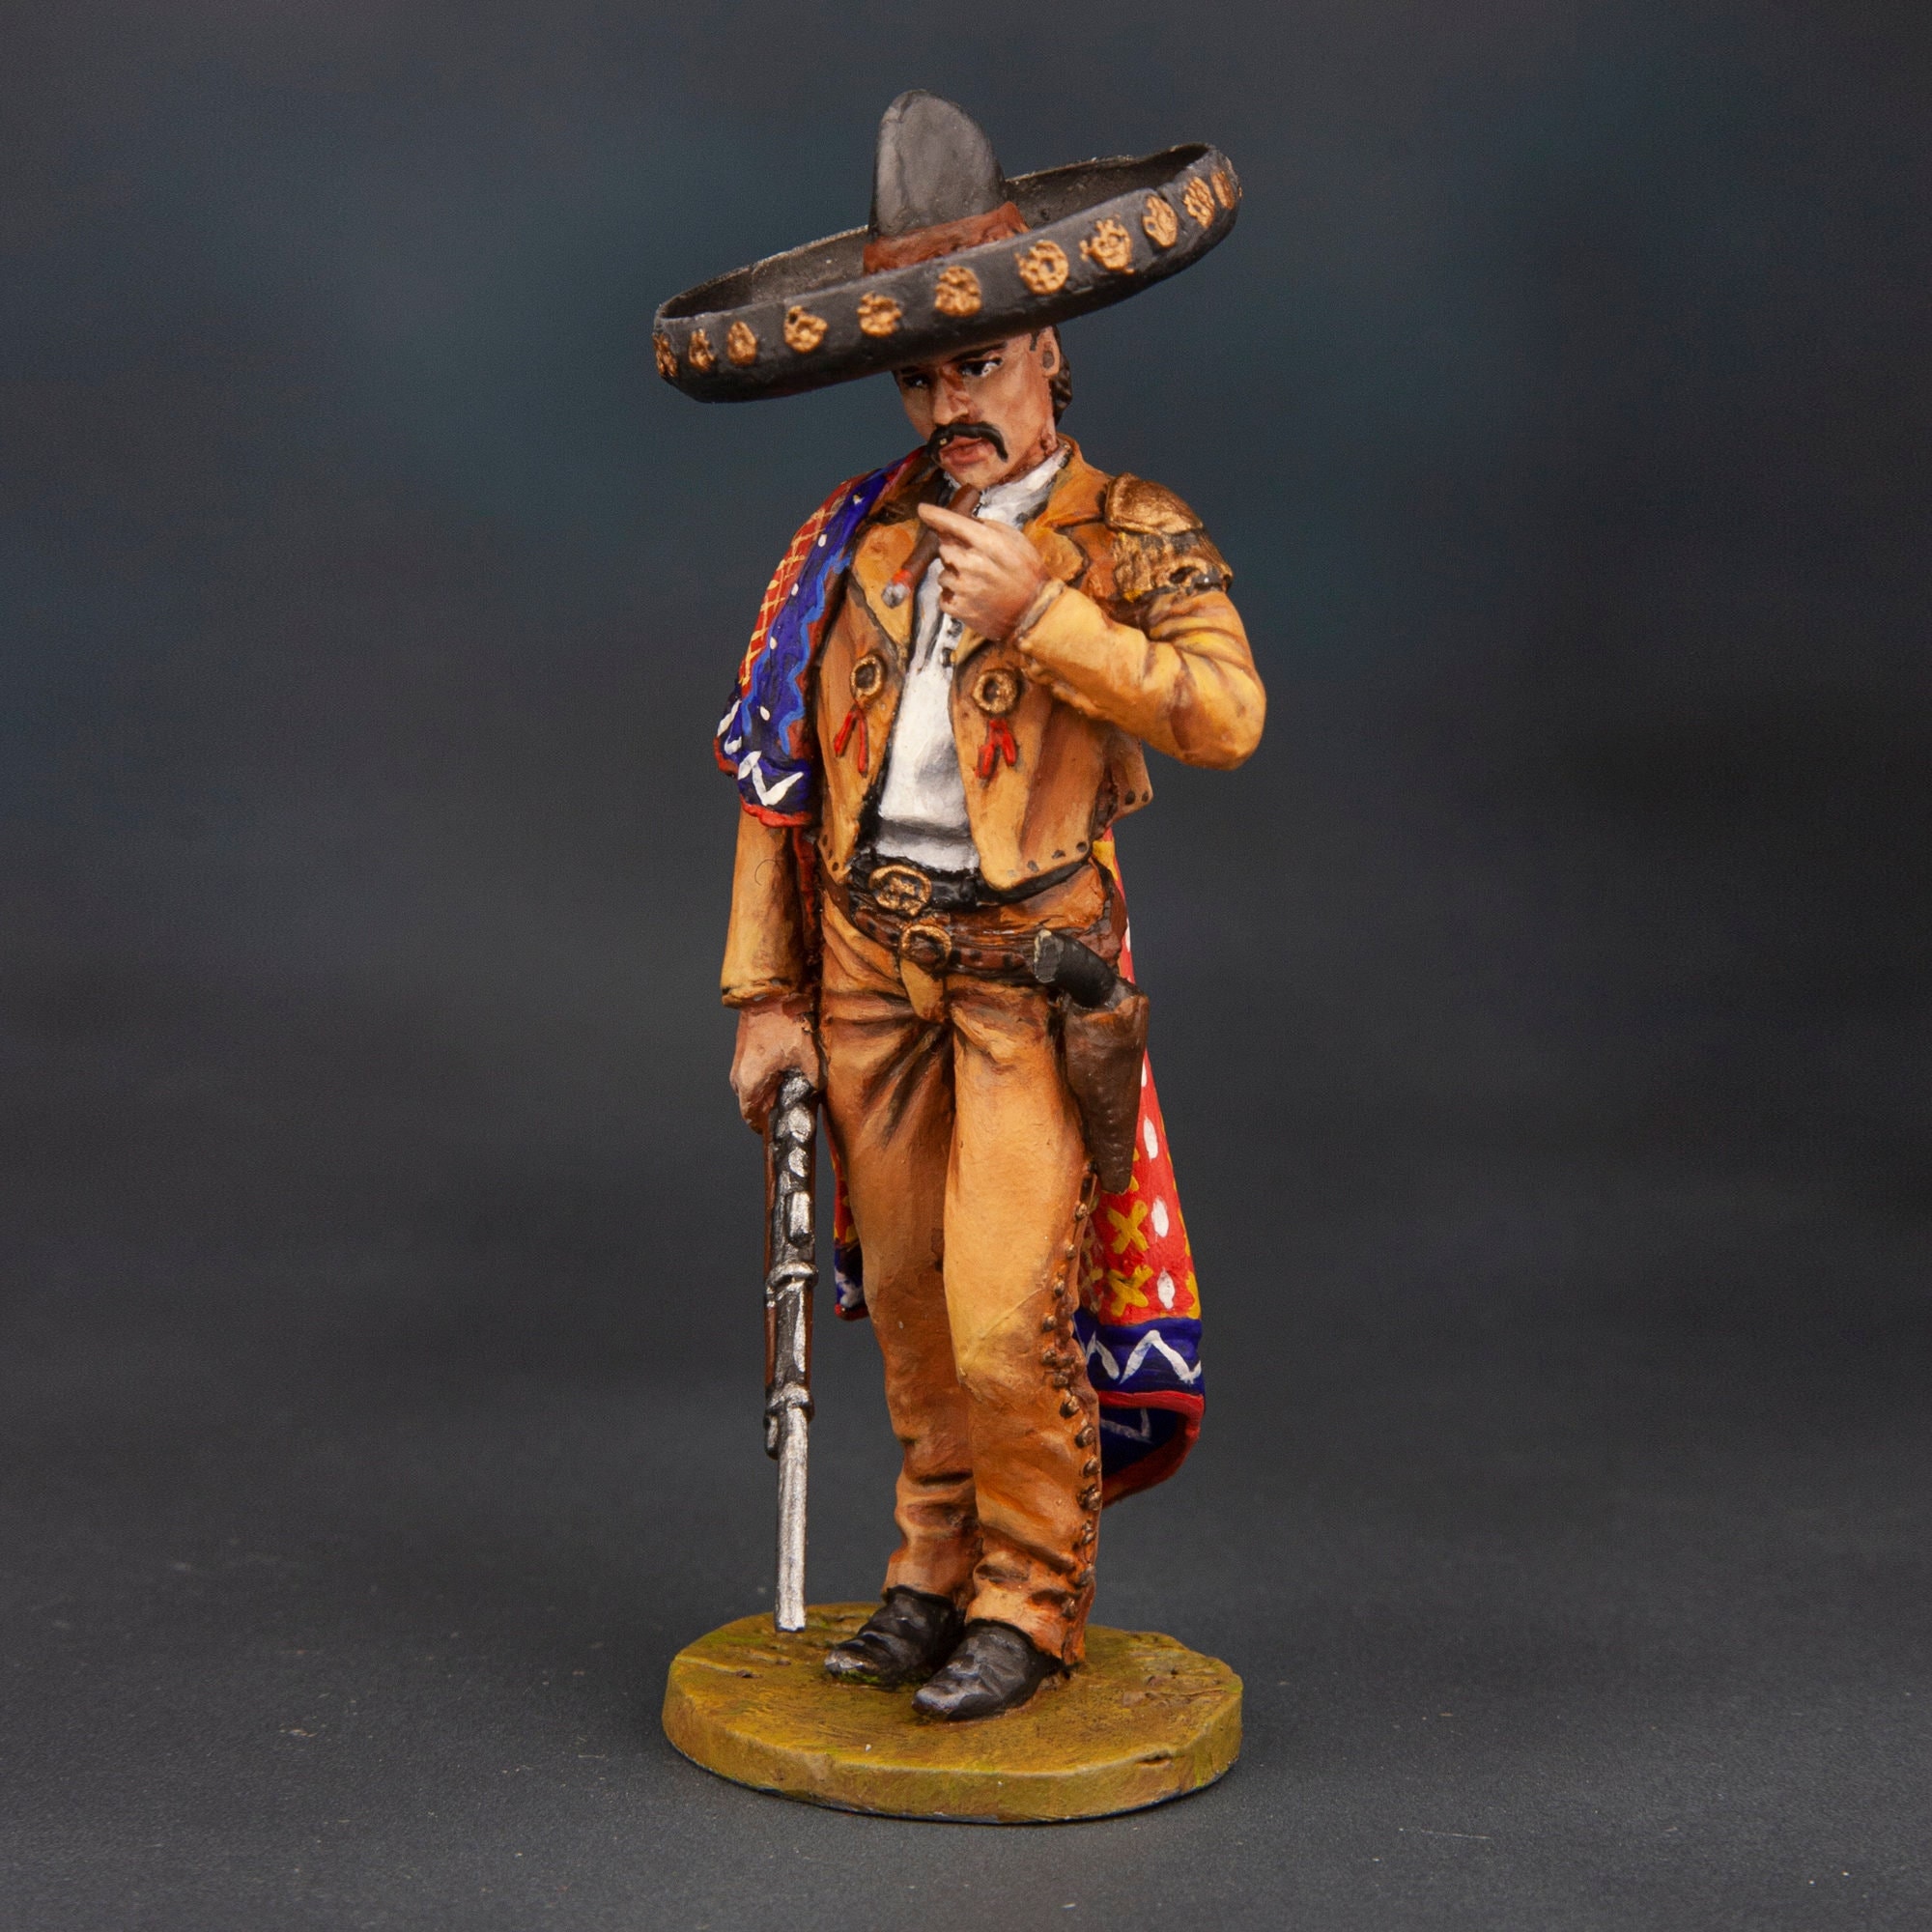 Mexican in Sombrero Figurine, Mexican Bandit With Handguns, Metal